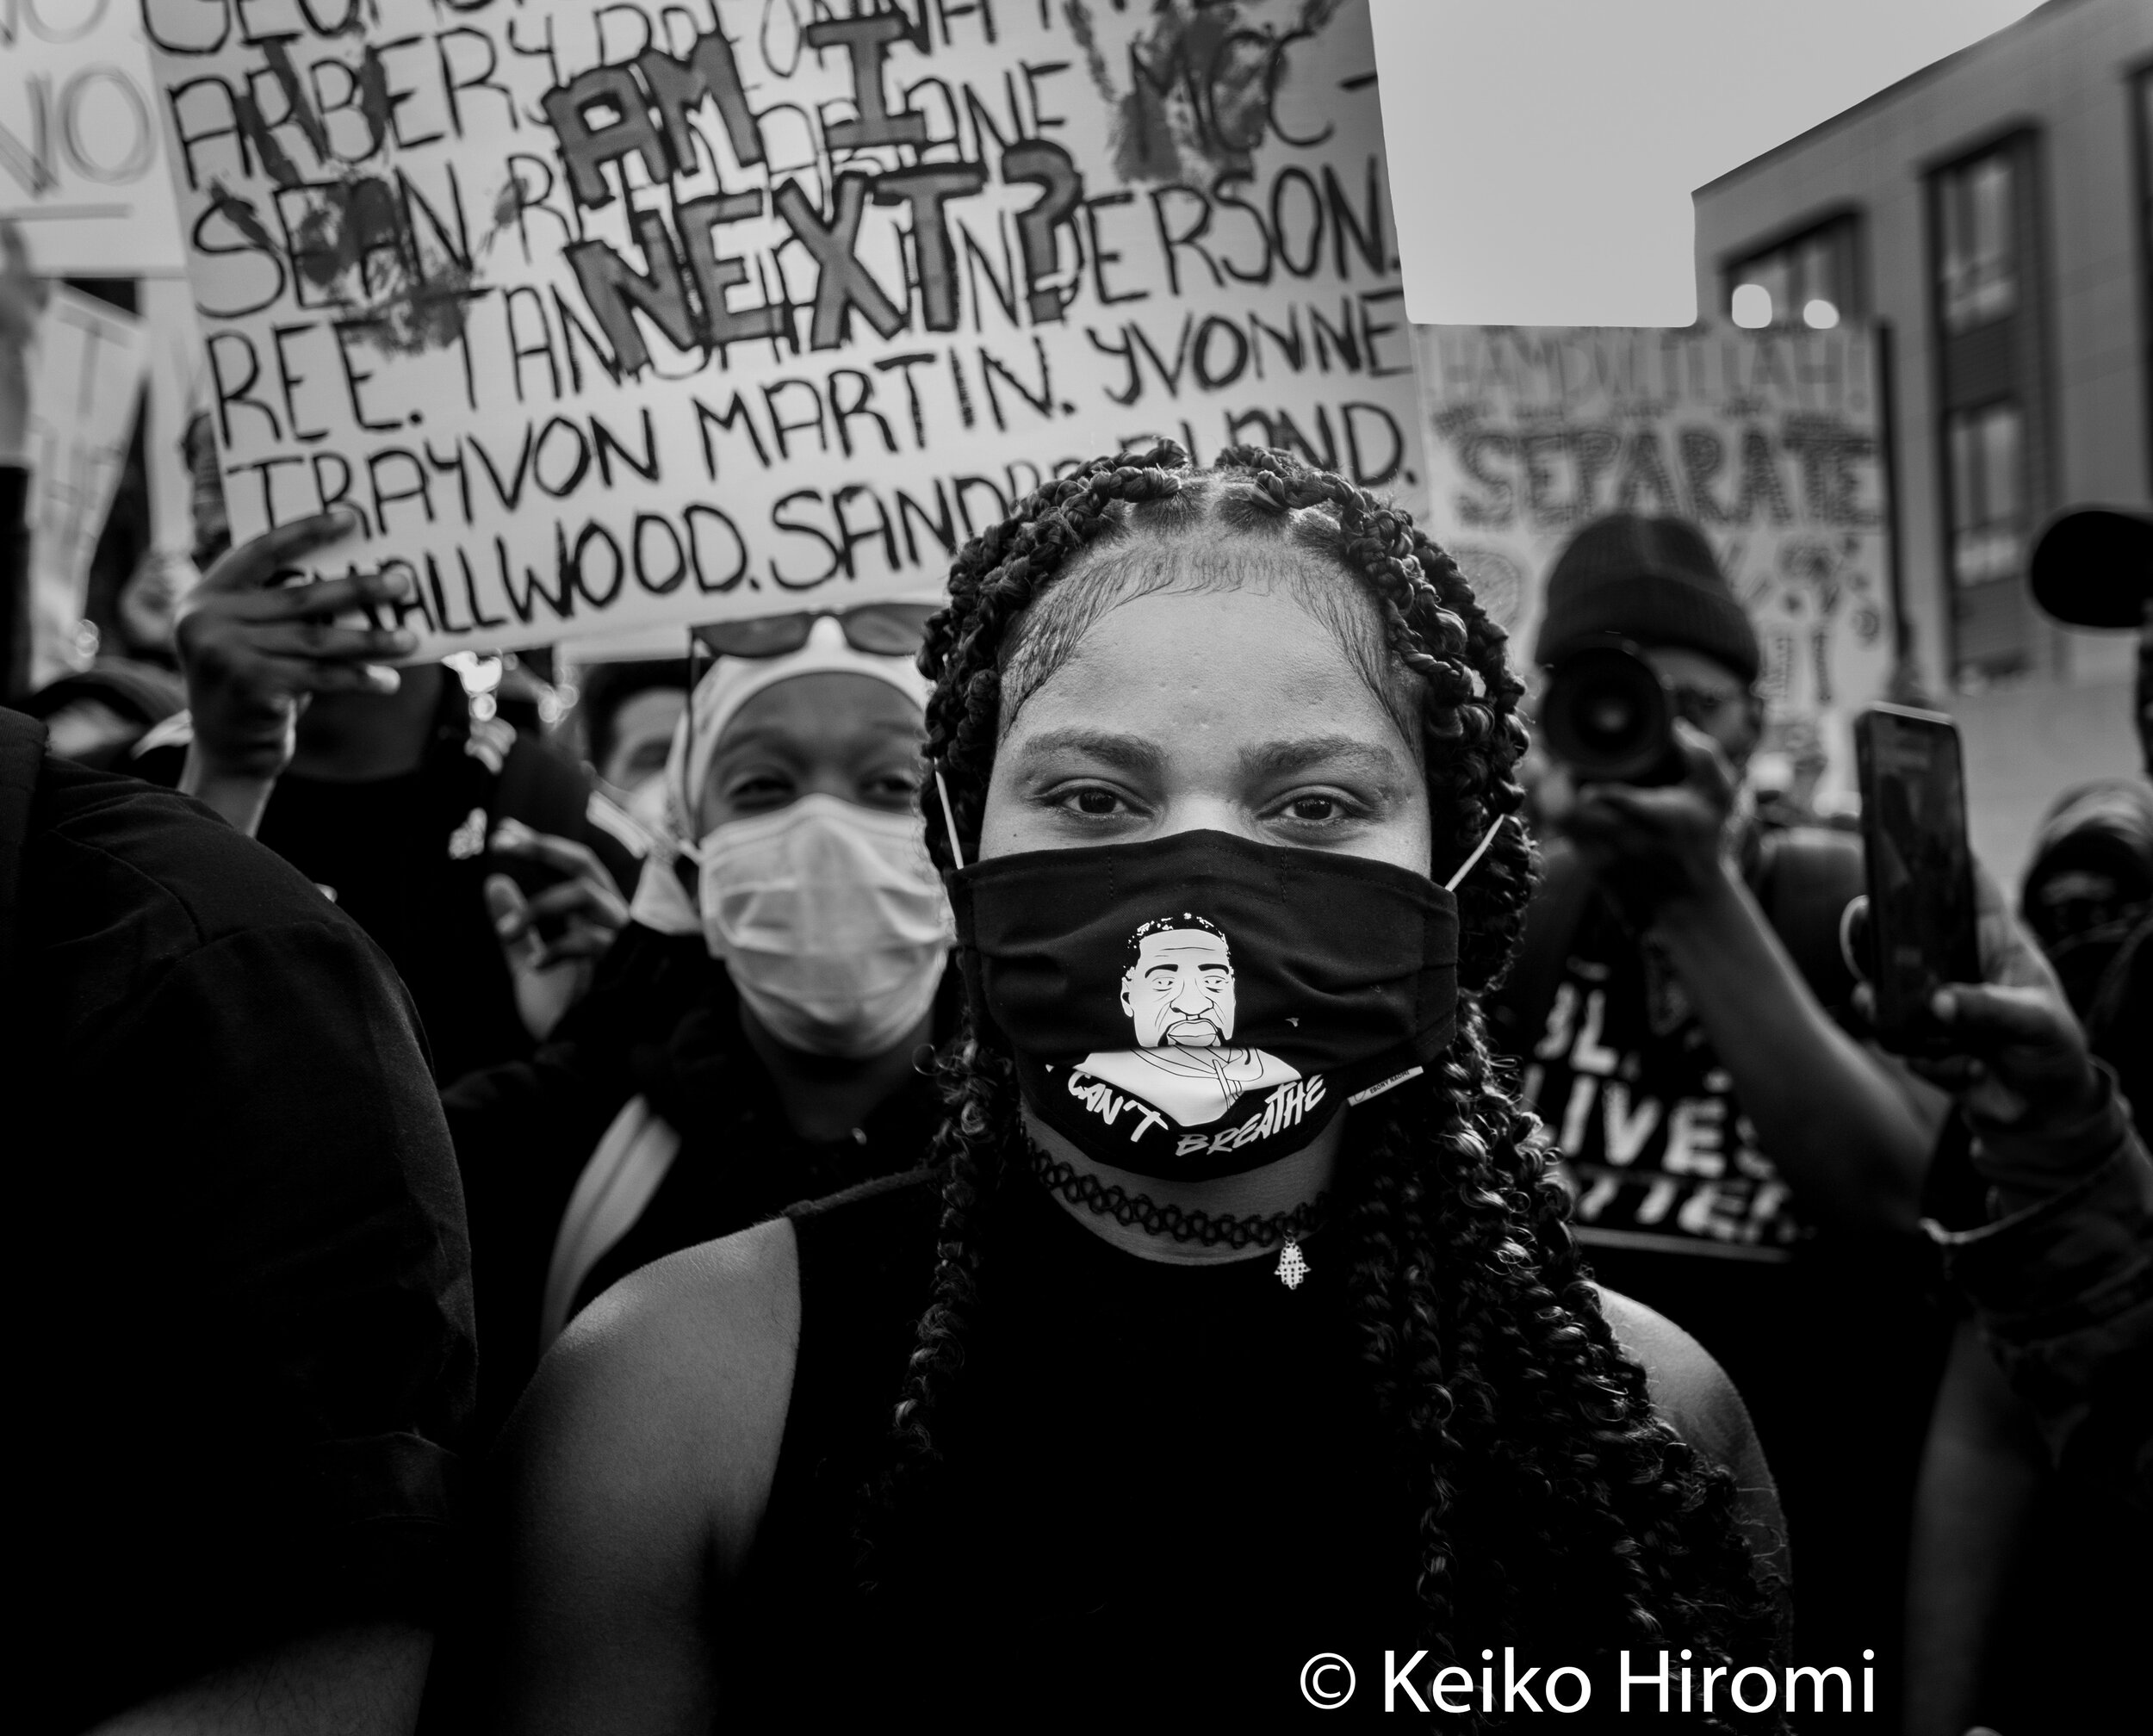  May 31, 2020, Boston, Massachusetts, USA: A protester during a rally in response to deaths of George Floyd and against police brutality and racism in Boston. 